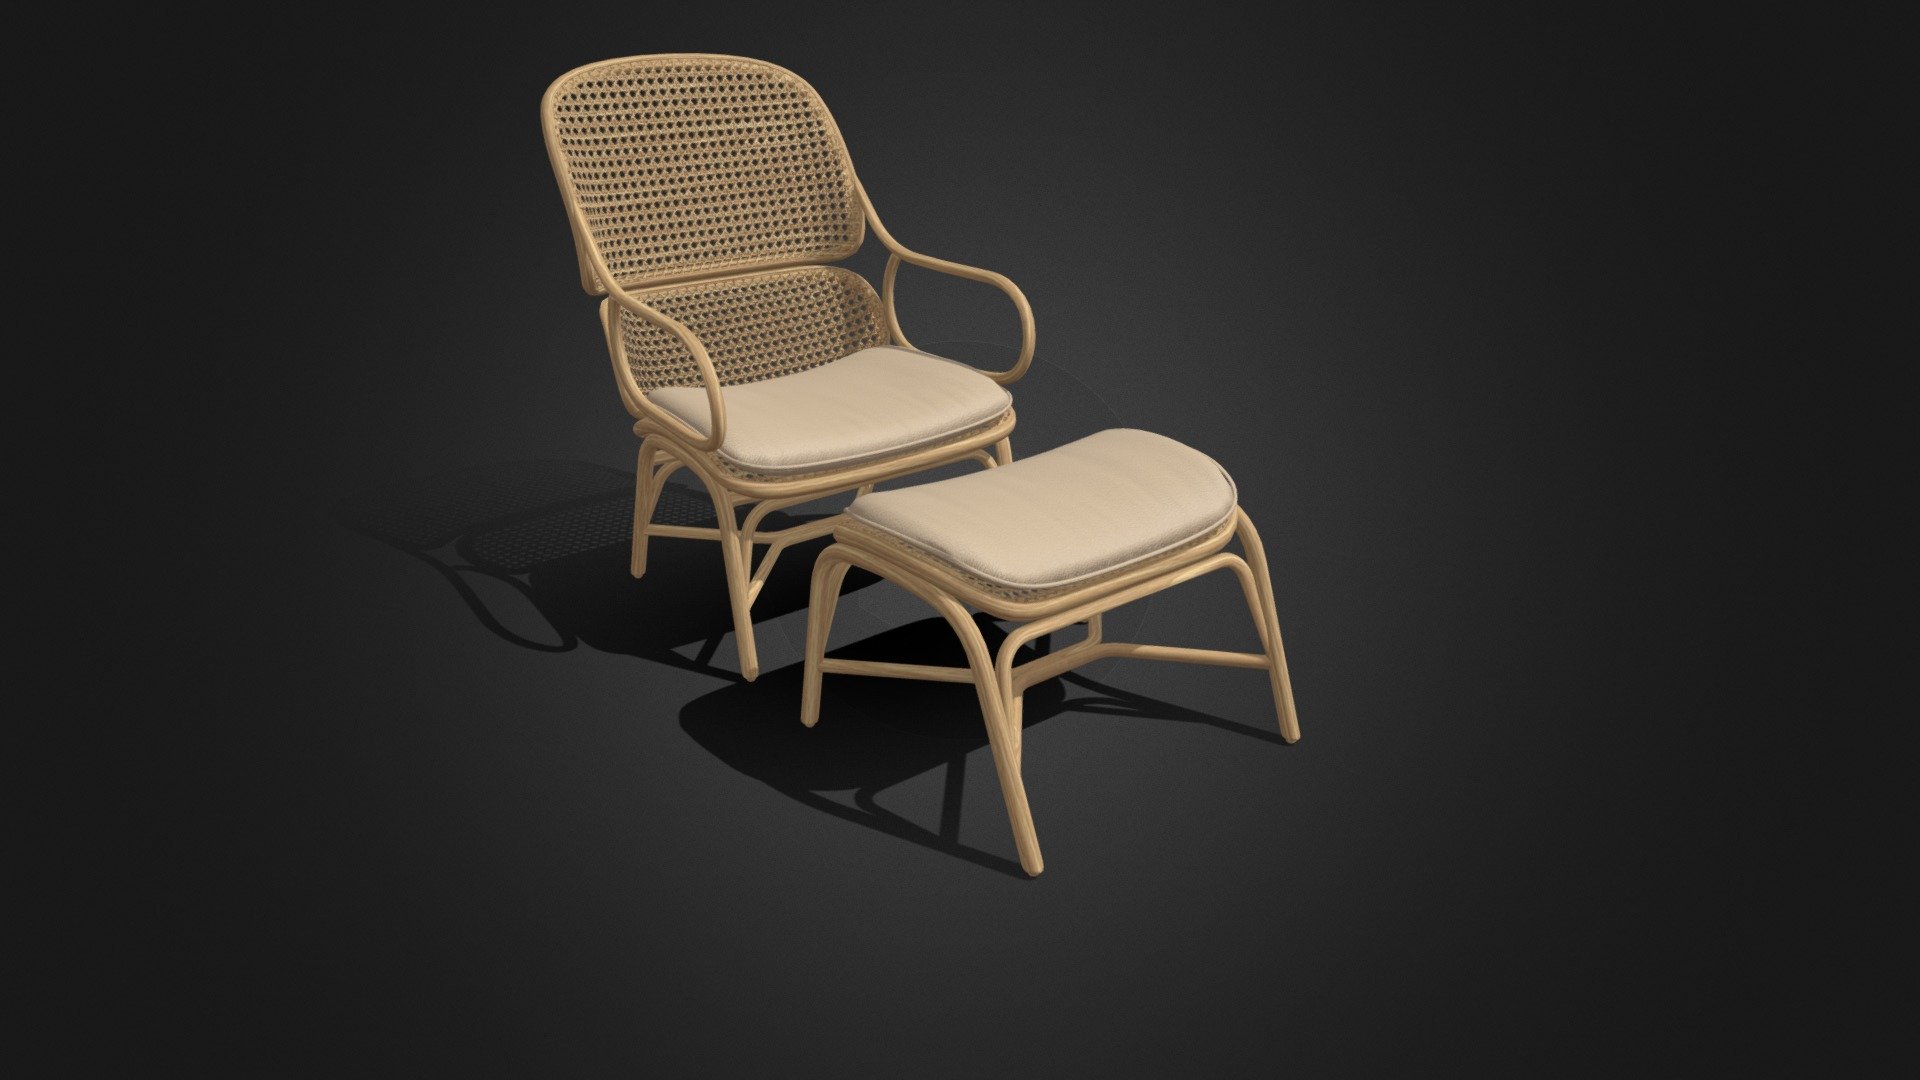 3d model of a Expormim Frames Armchair with ottoman. (PBR texture )

This product is made in Blender and ready to render in Cycle. Unit setup is metres and the models are scaled to match real life objects. 

The model comes with textures and materials and is positioned in the center of the coordinates system.


No additional plugin is needed to open the model.




Notes:



Geometry: Polygonal

Textures: Yes 

Rigged: No

Animated: No

UV Mapped: Yes

Unwrapped UVs: Yes, non-overlapping


Bake normal map




Note: don't forget to take a few seconds to rate this product, your support will allow me to continue working .
Thanks in advance for your help and happy blending!




Hope you like it! Thank you!



My youtube channel : https://www.youtube.com/toss90 - Expormim Frames Armchair With Ottoman - Buy Royalty Free 3D model by Toss90 3d model